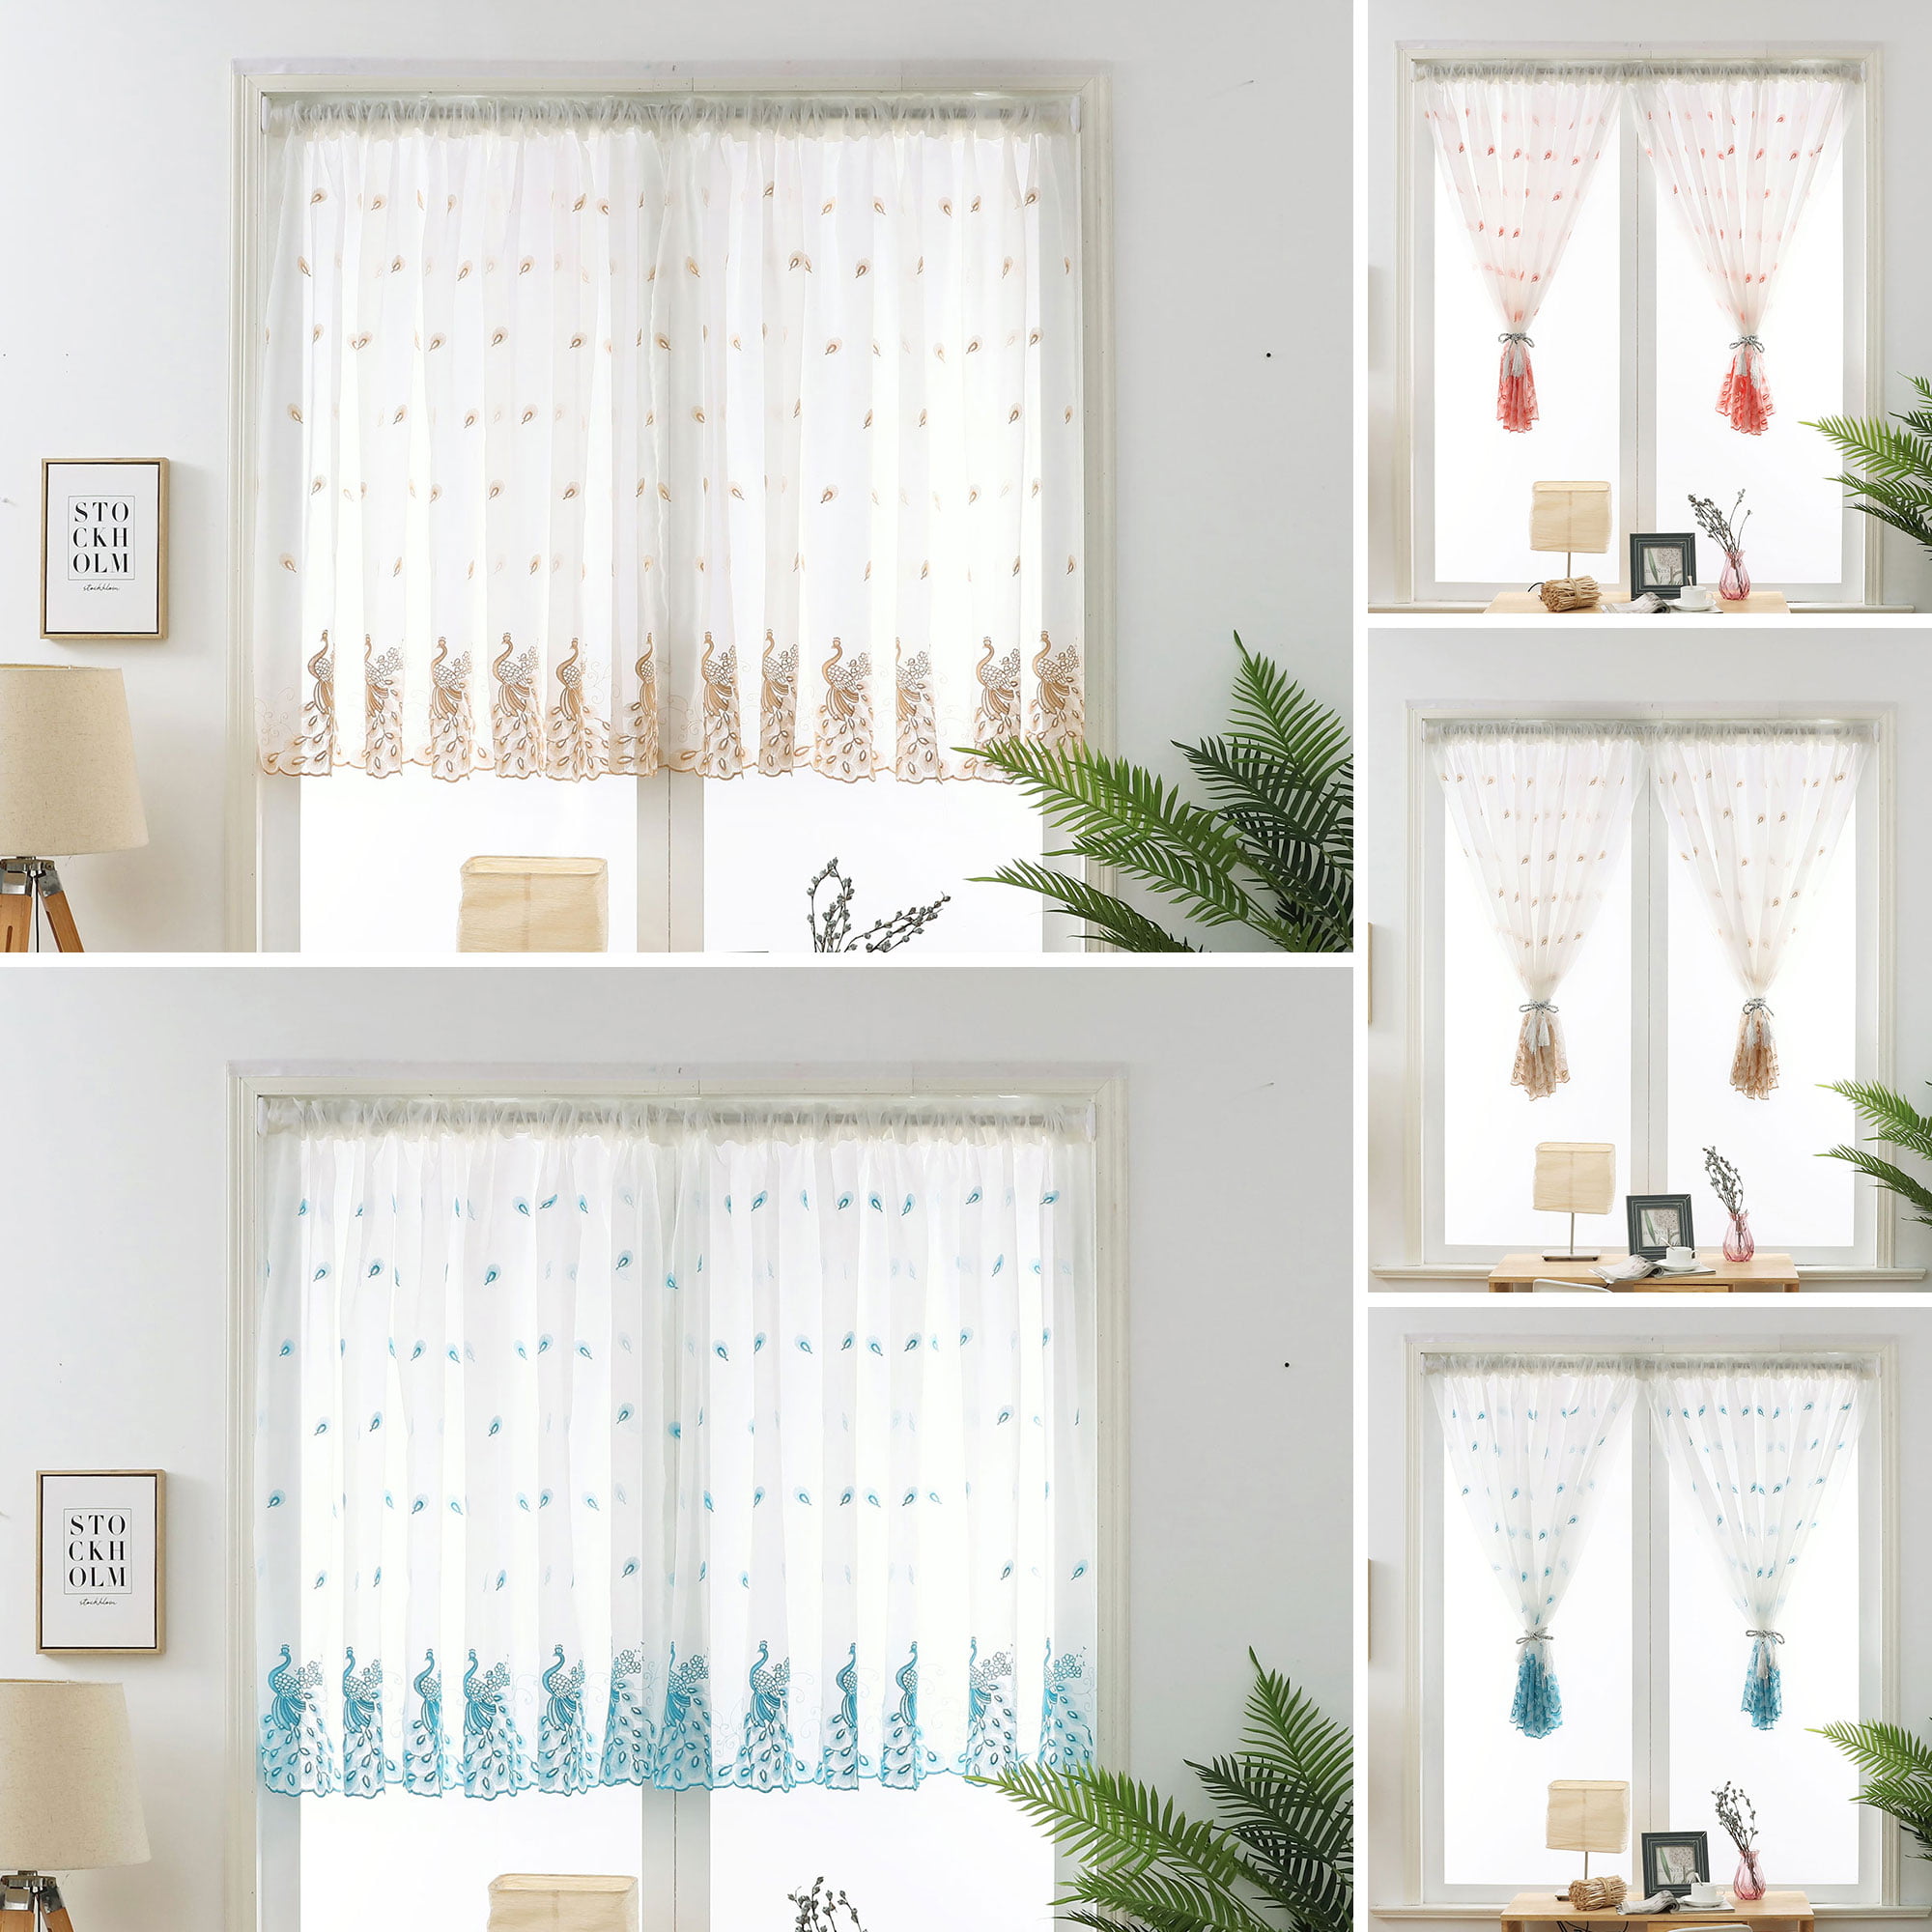 Embroidery Curtain Fabric Crochet Net Lace Tulle Voile Panel Drape Divider White 